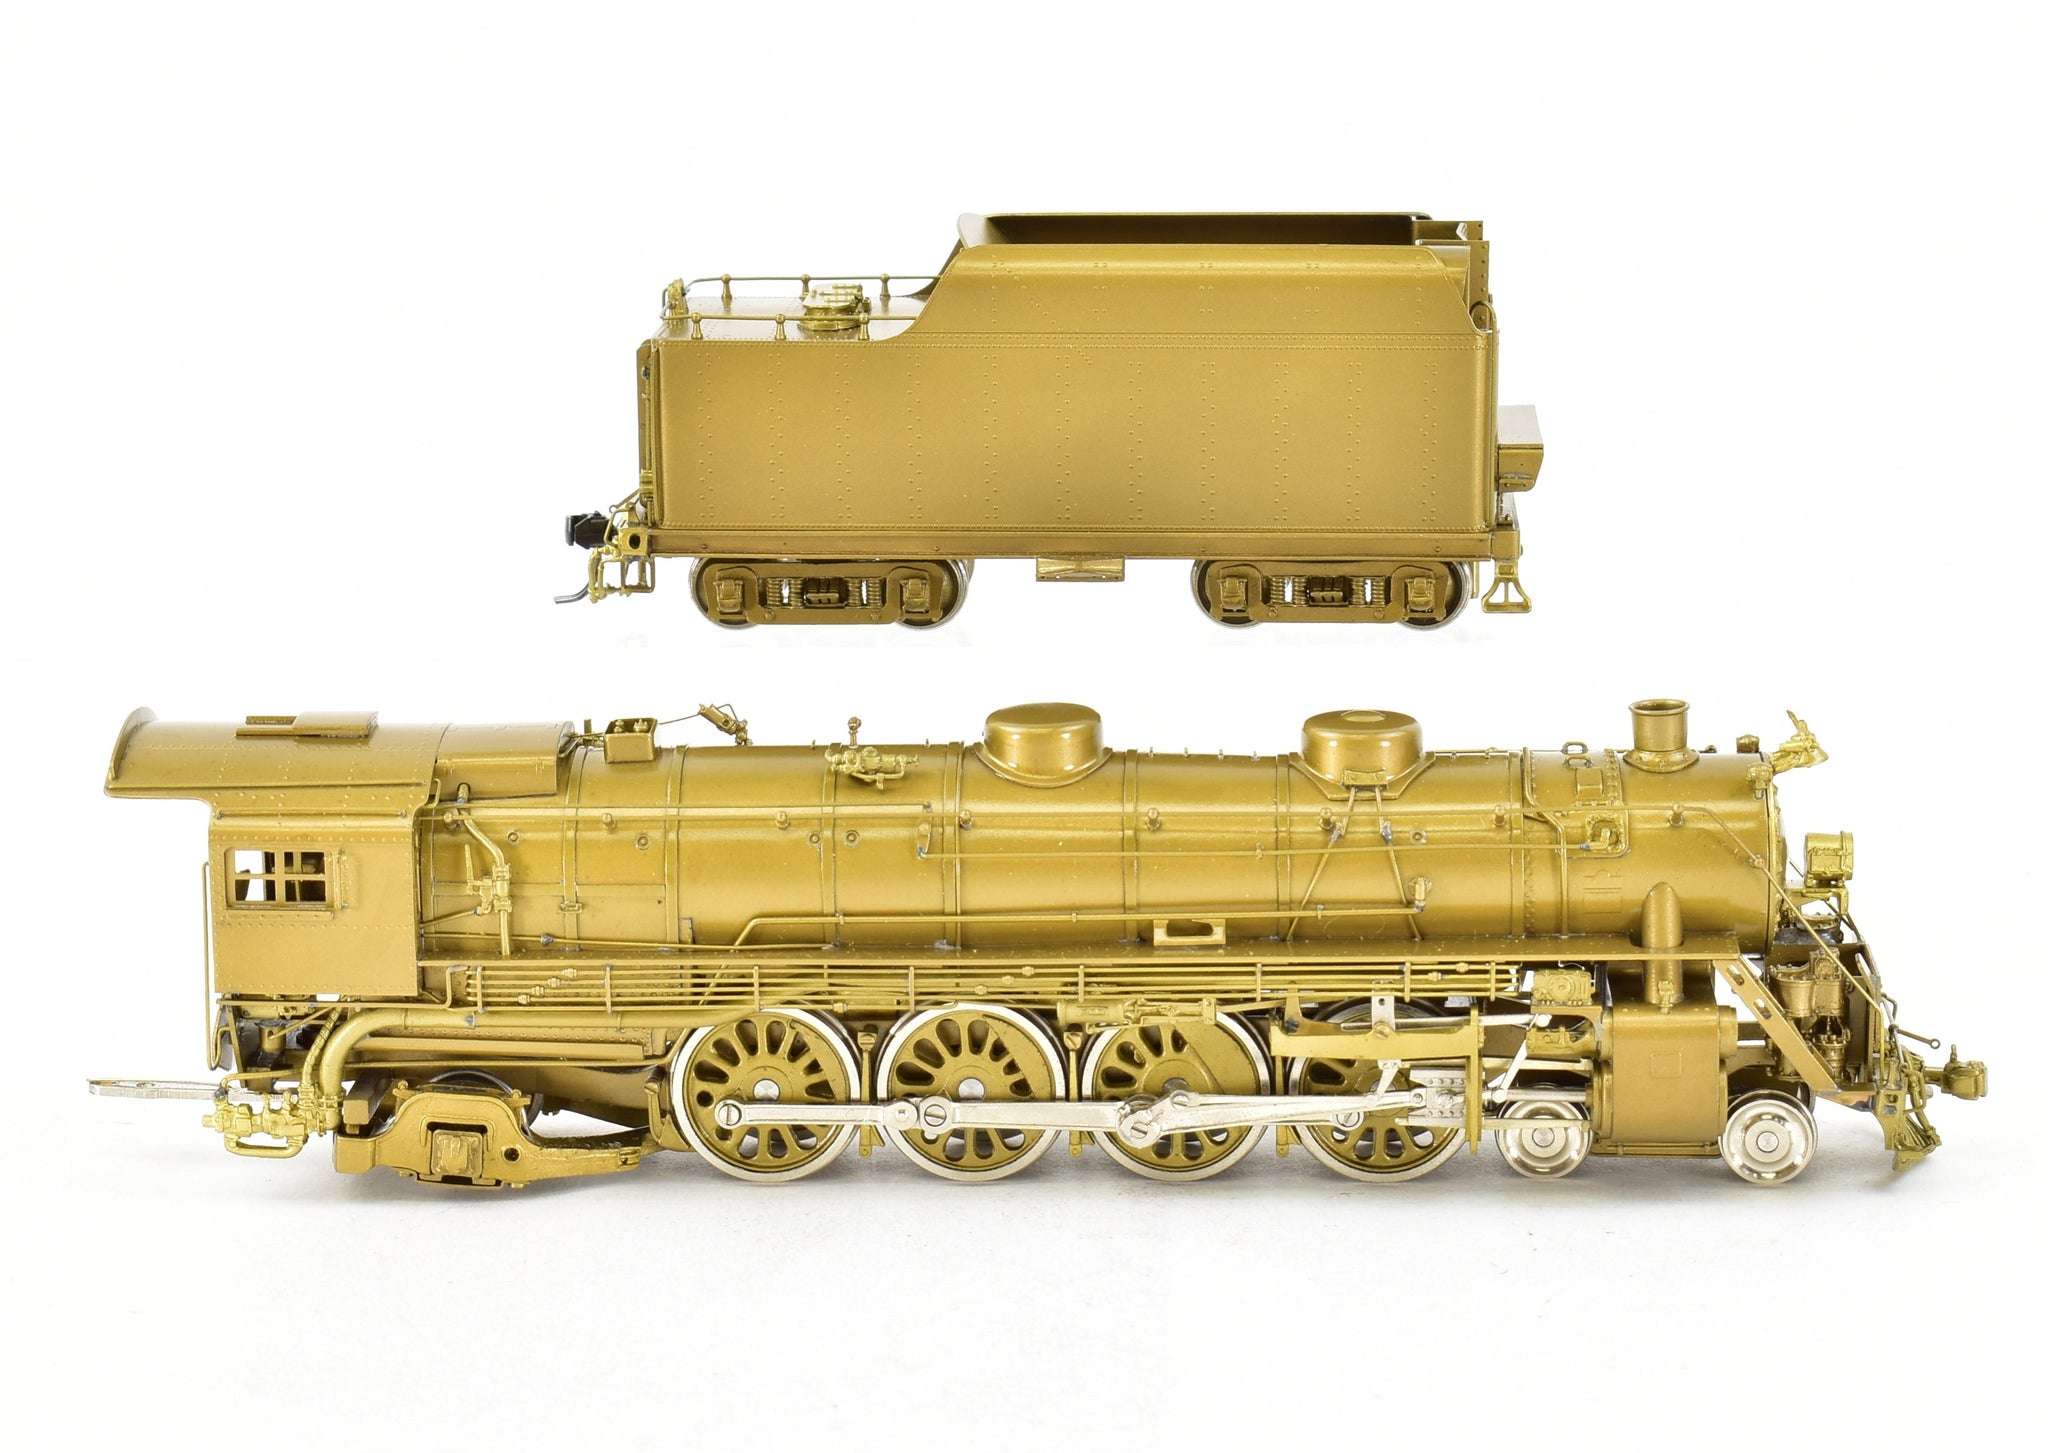 HO SCALE BRASS train CONTINENTAL M-8 ENGNE AND TENDER, MADE IN